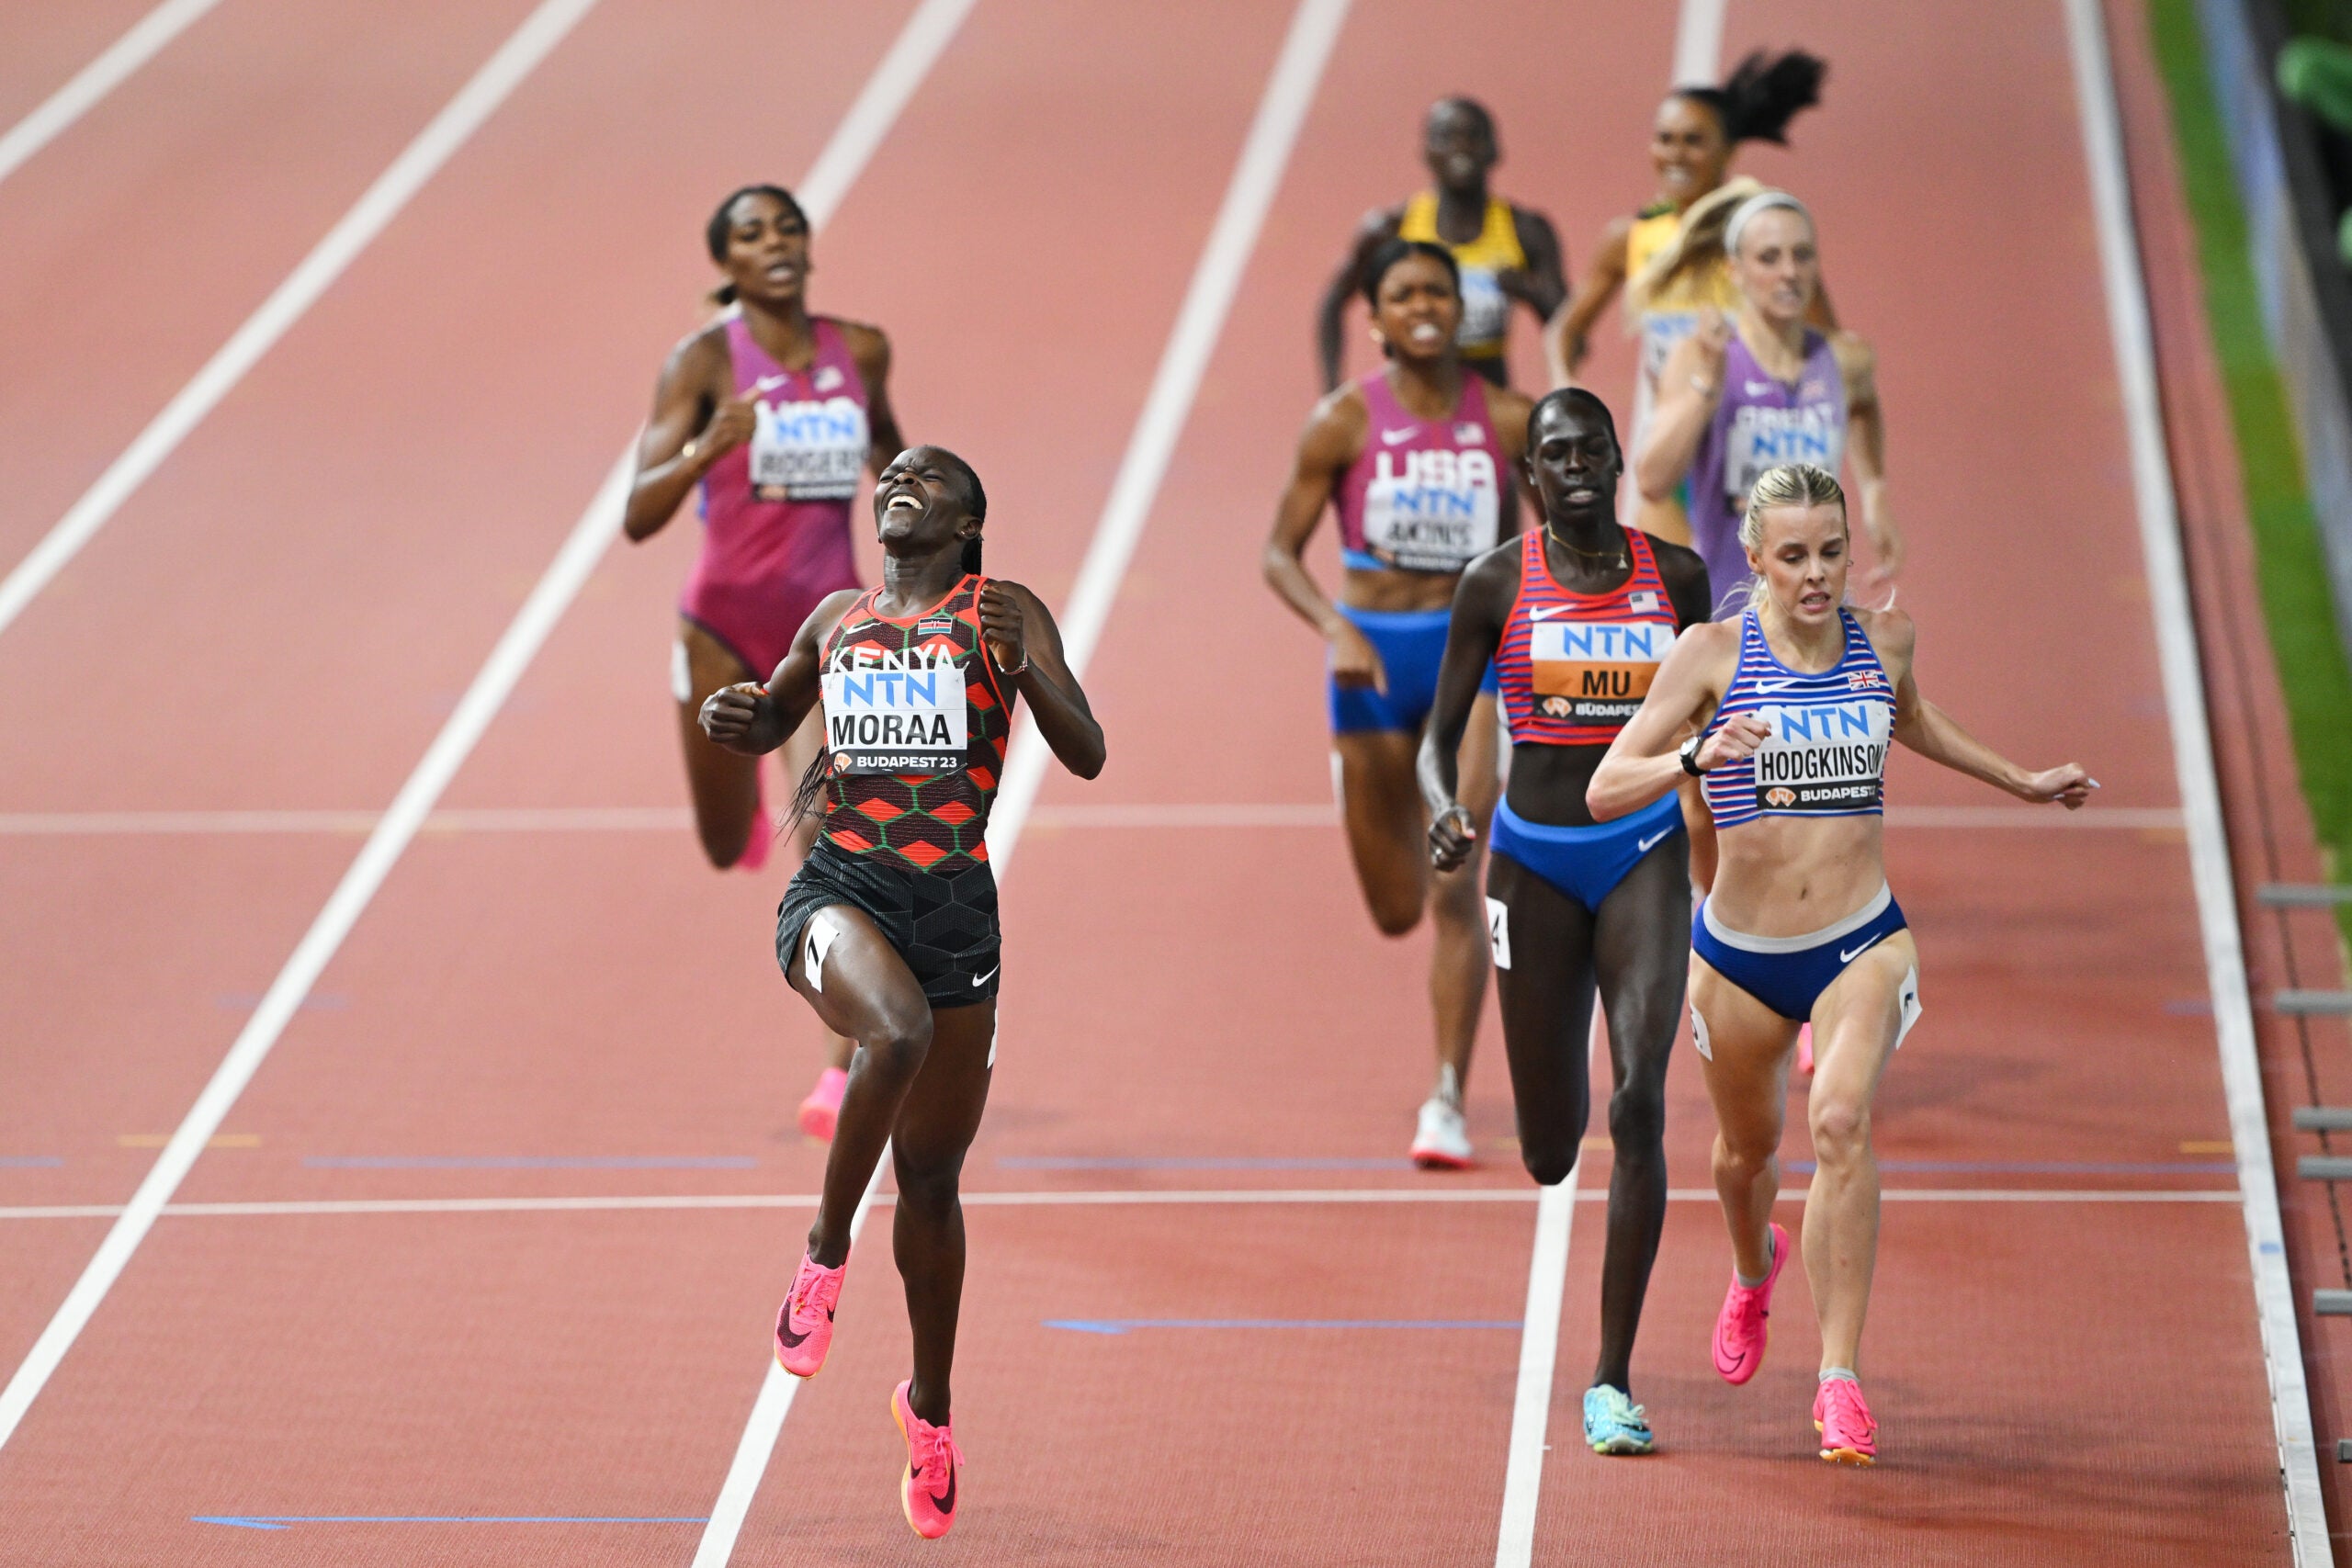 World Athletics Championships Live Updates: Finals in the 800 Meters,  Steeplechase and the 4x400 Meter Relay - Women's Running